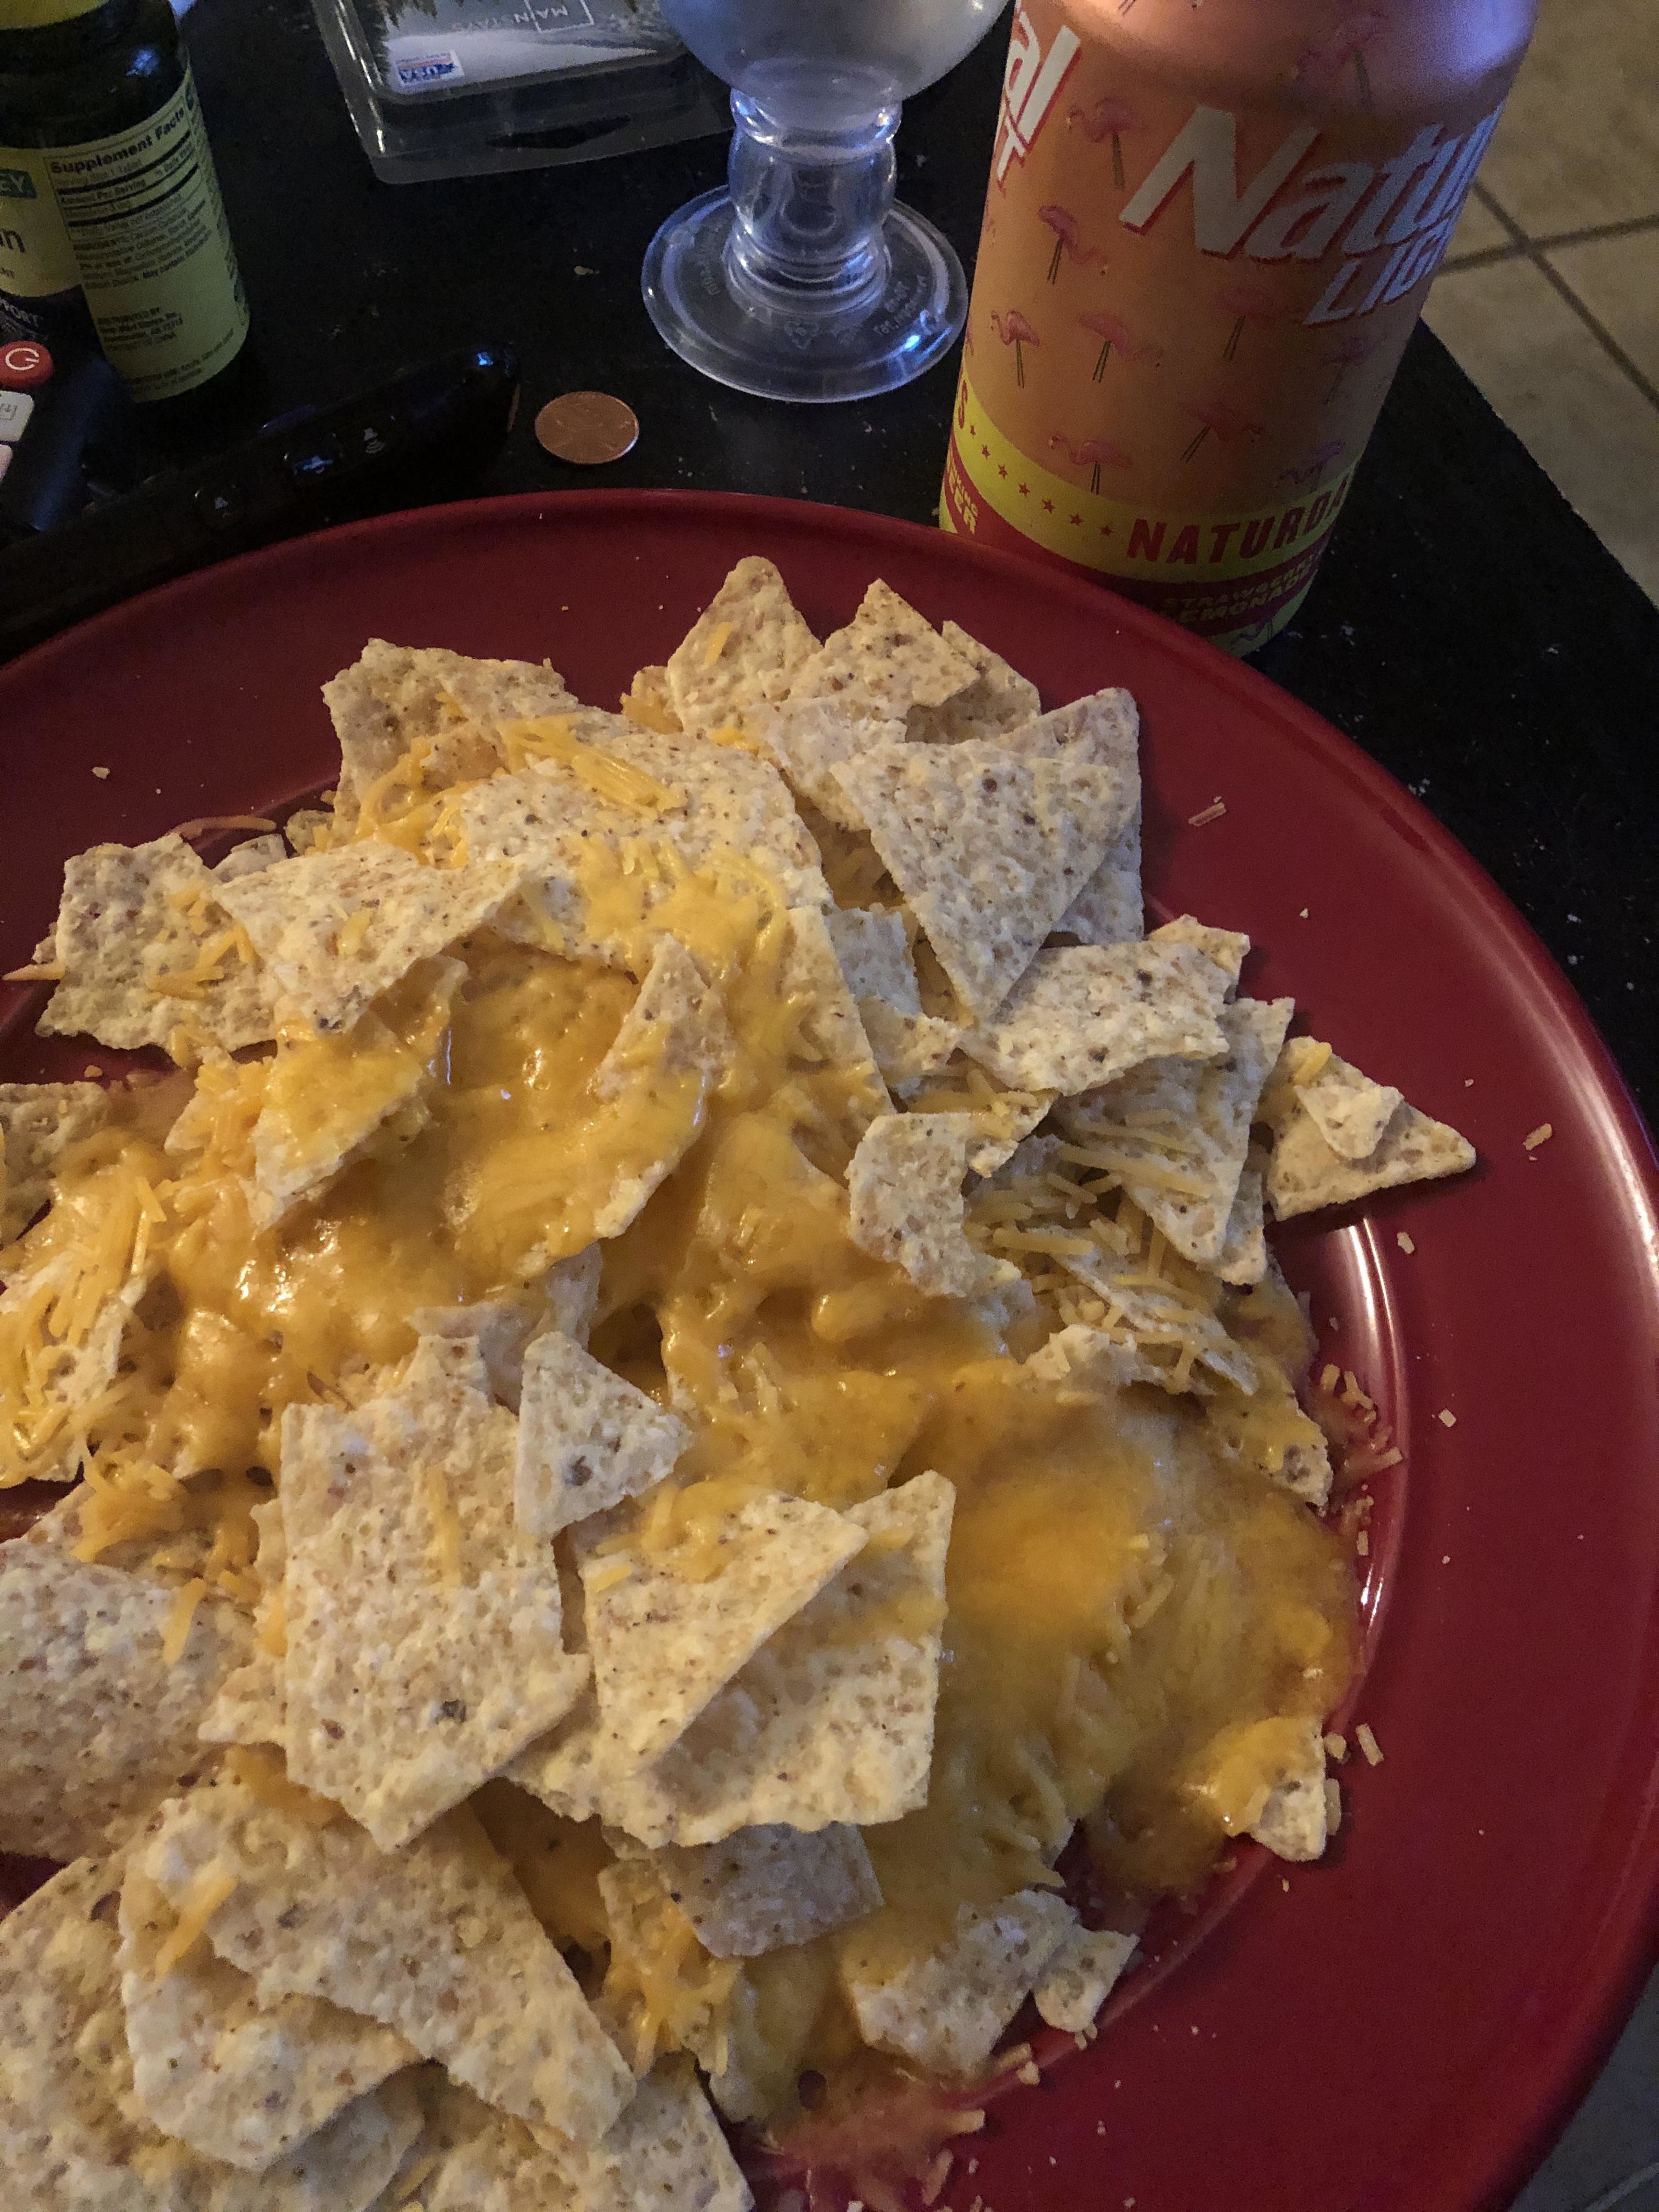 Plate of nachos with melted cheese, next to a can of Natural Light beer